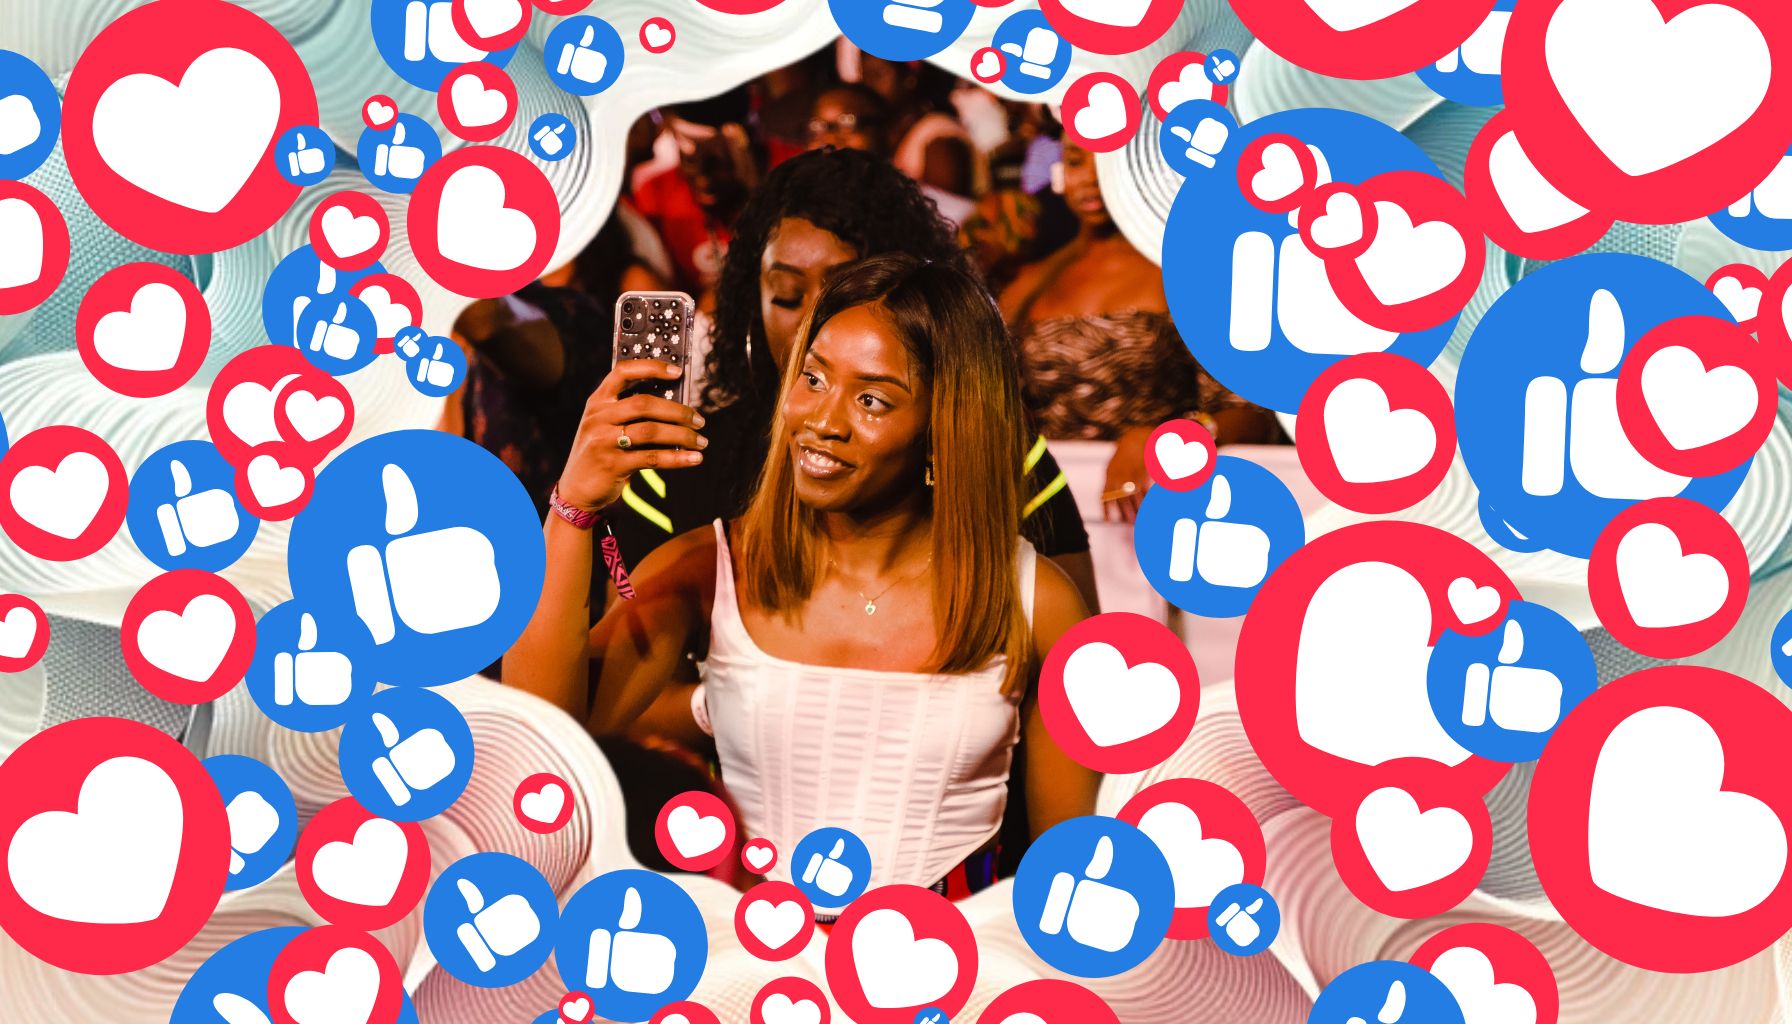 facebook likes, instagram hearts, and tiktok hearts cover up the image with a music fan focused in the middle live at a concert